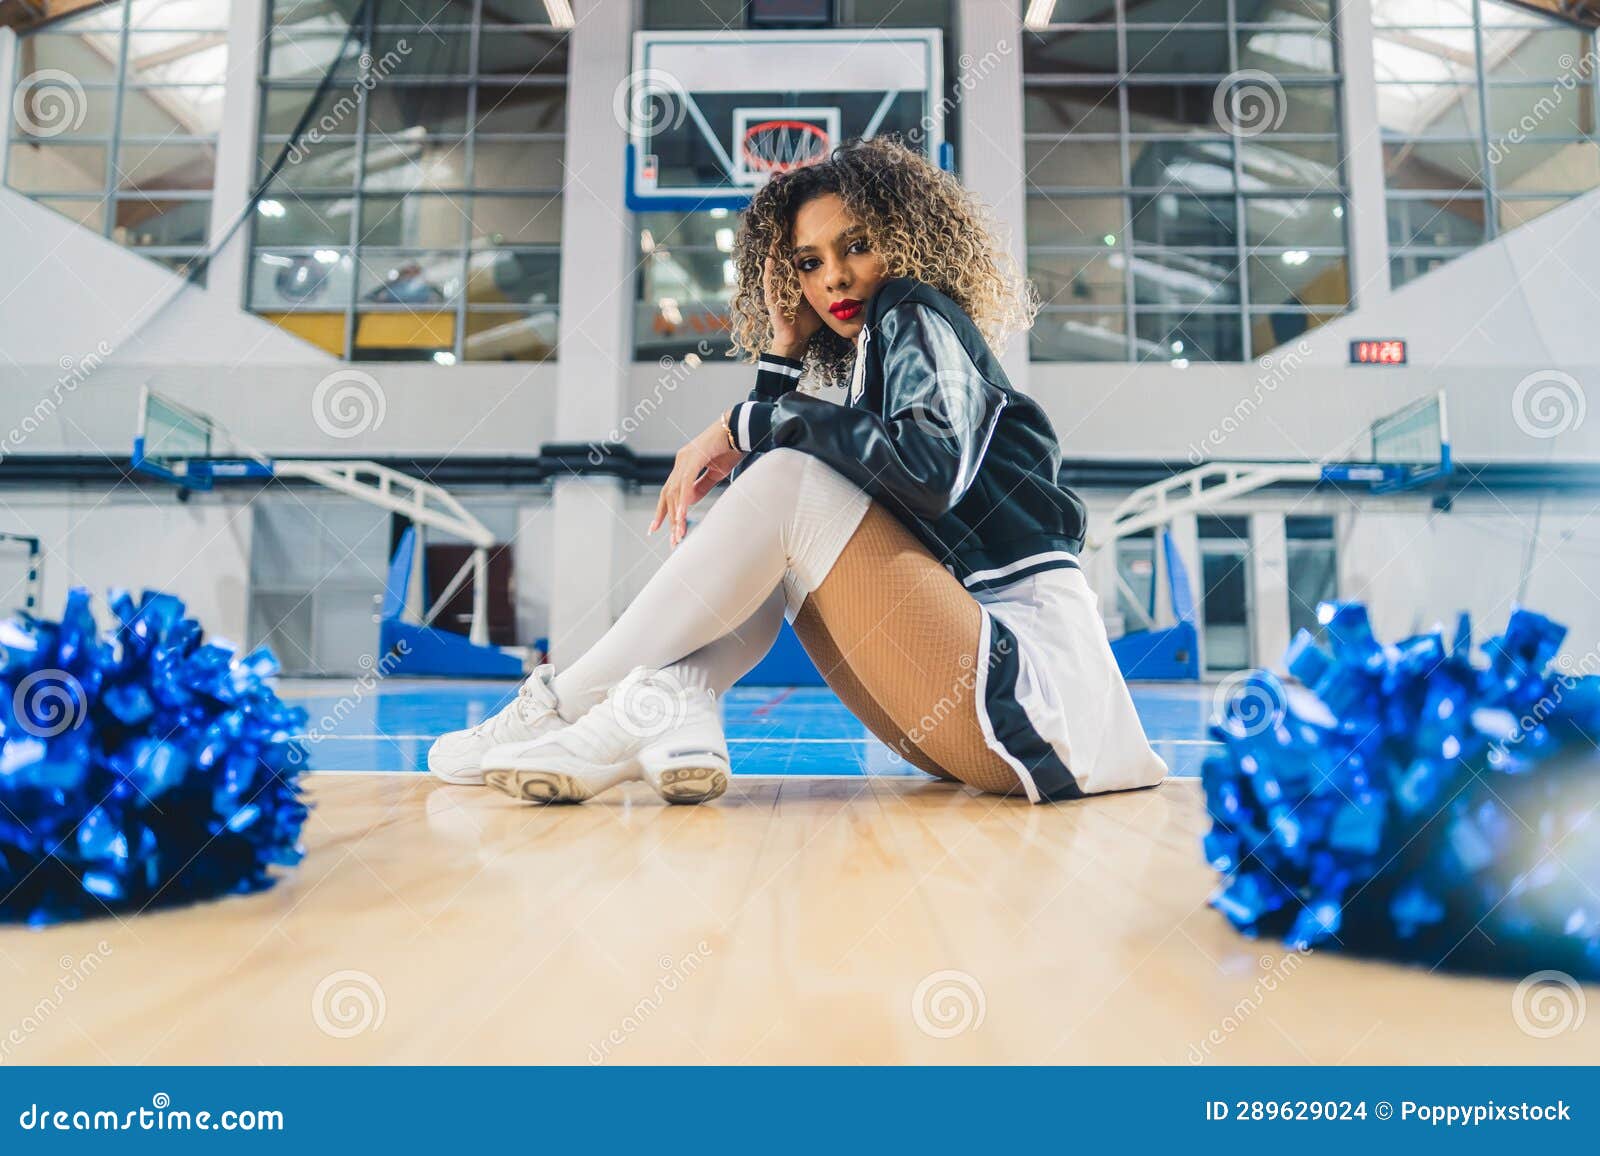 Cheerleader Woman with Afro Hair Sitting on a Basketball Court Floor with Pom  Poms Stock Photo - Image of cheerleader, pose: 289629024